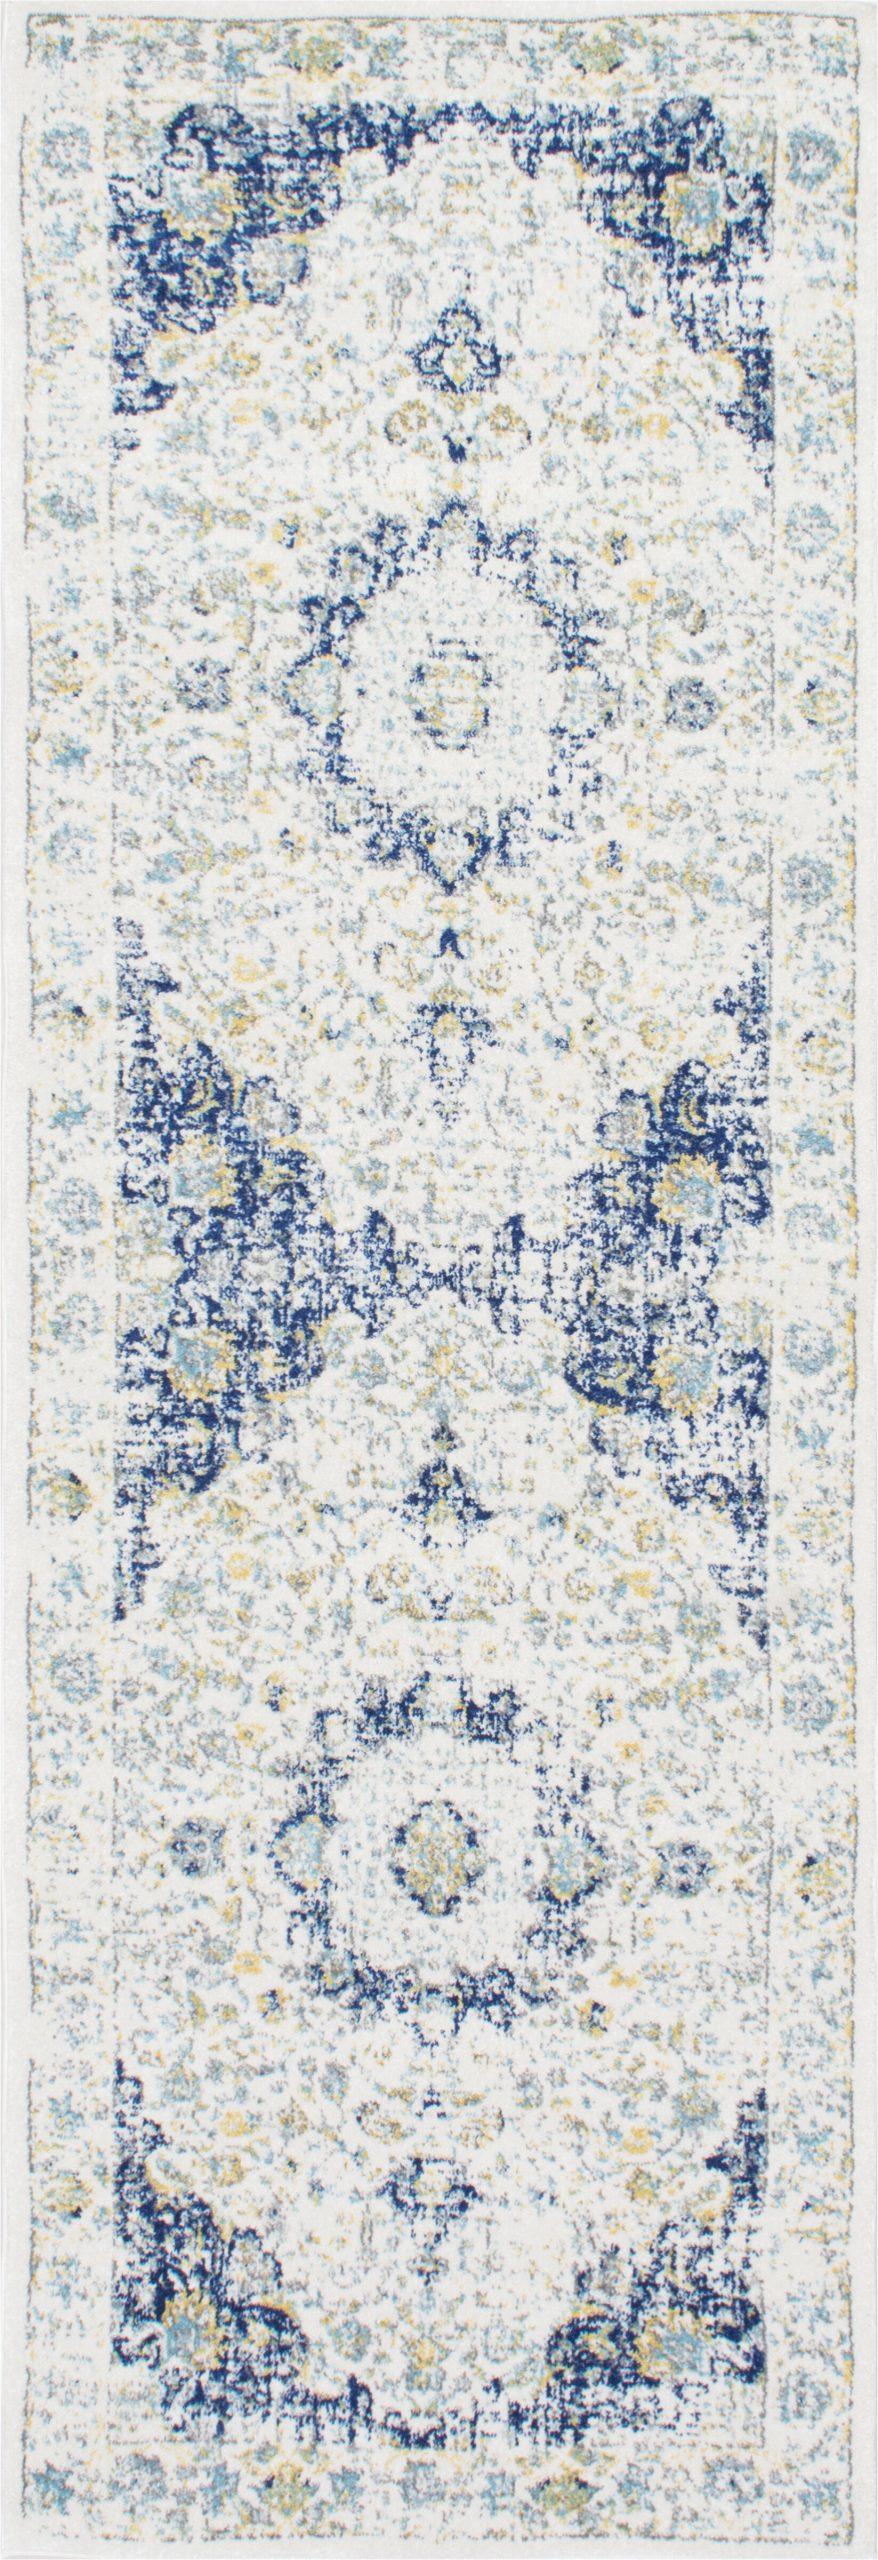 blue runner area rugs c a1247 a1249